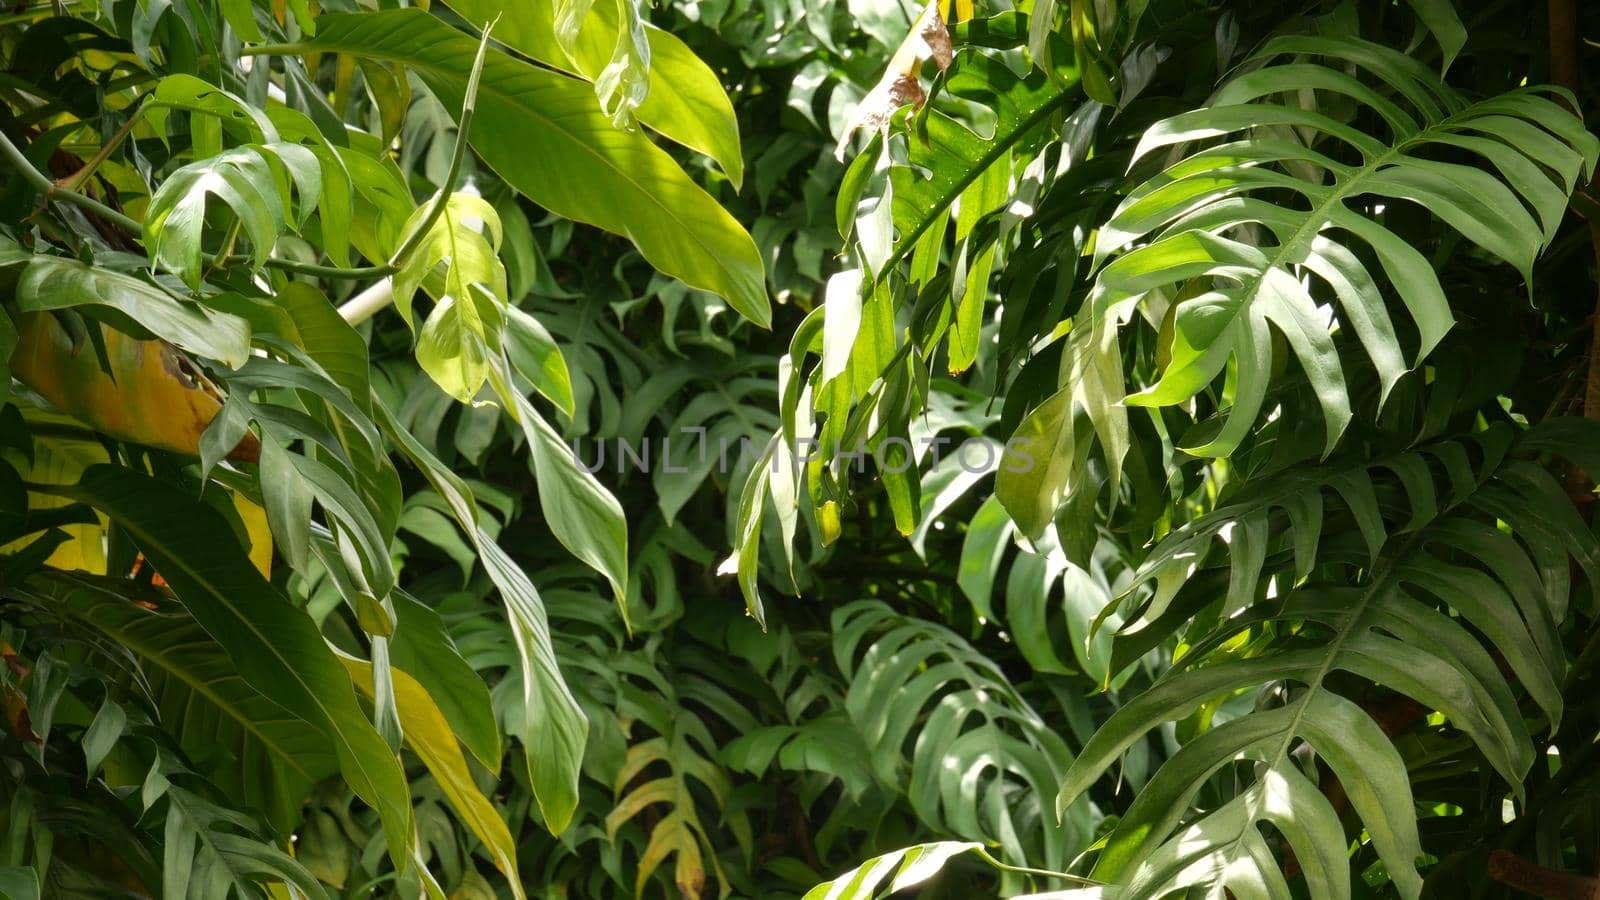 Juicy exotic tropical monstera leaves texture backdrop, copyspace. Lush foliage, greenery in paradise garden. Abstract natural dark green jungle vegetation background pattern, wild summer rain forest. by DogoraSun